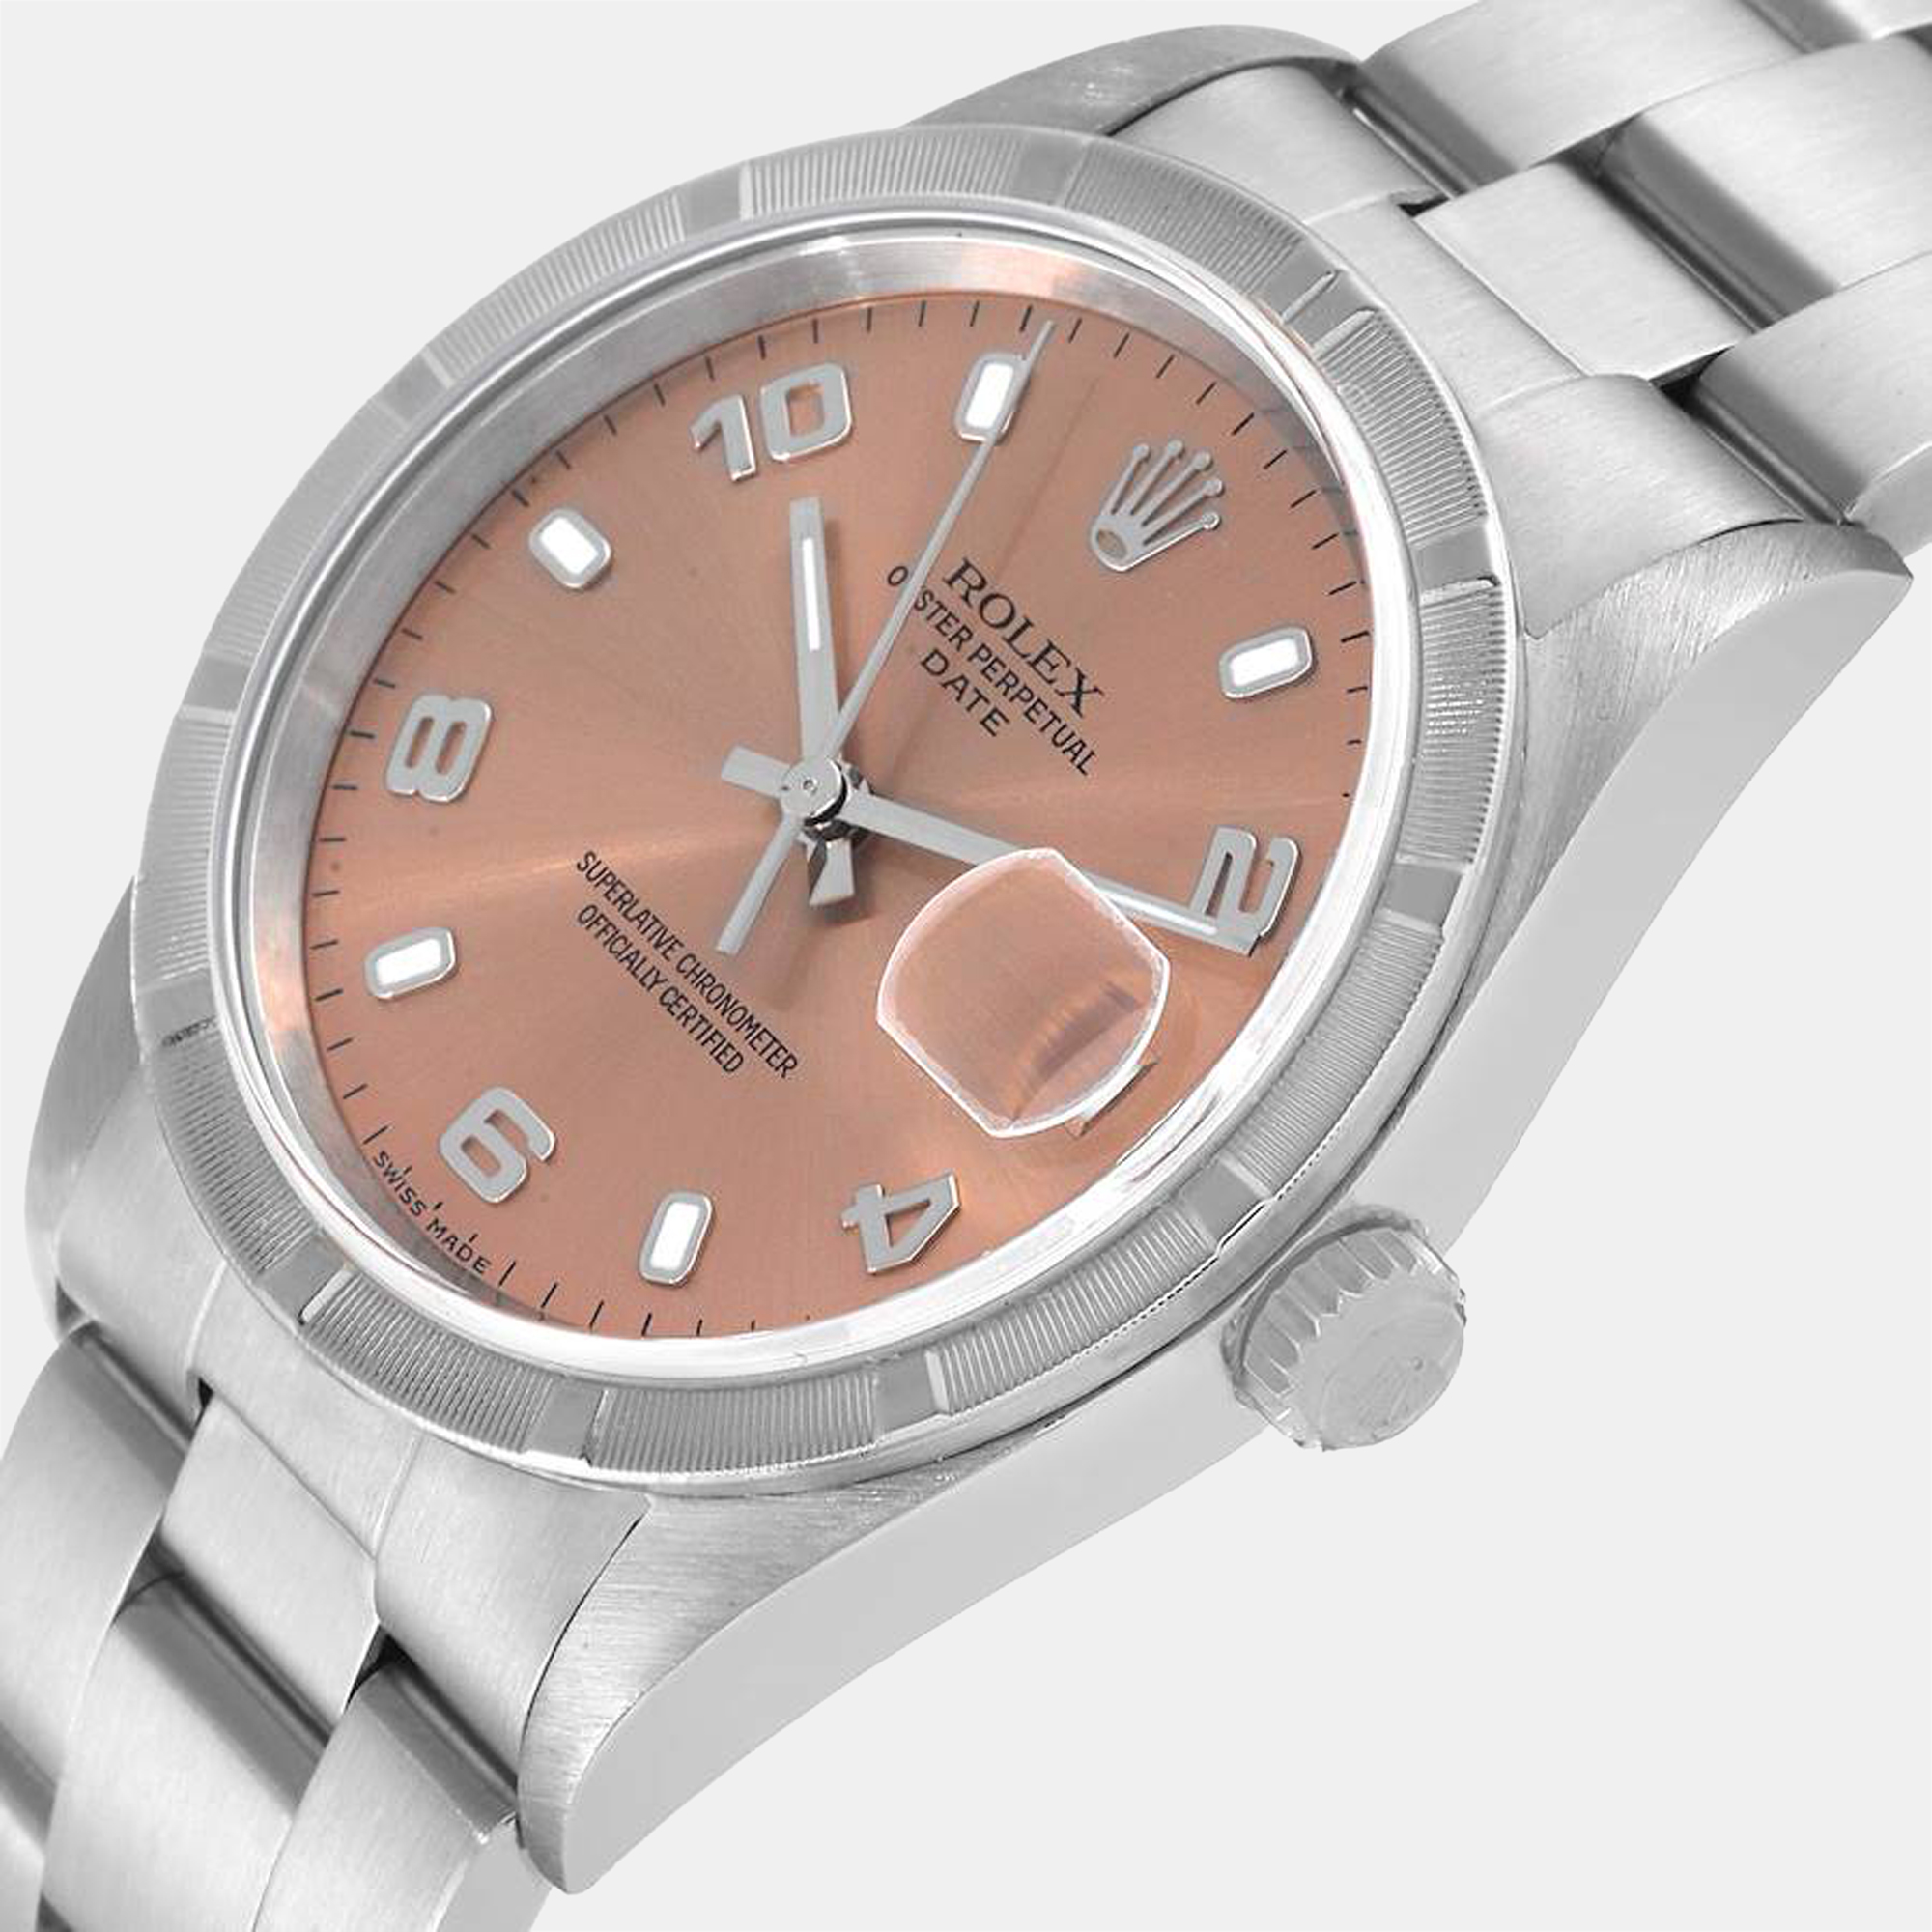 

Rolex Salmon Stainless Steel Oyster Perpetual Date 15210 Automatic Men's Wristwatch 34 mm, Pink